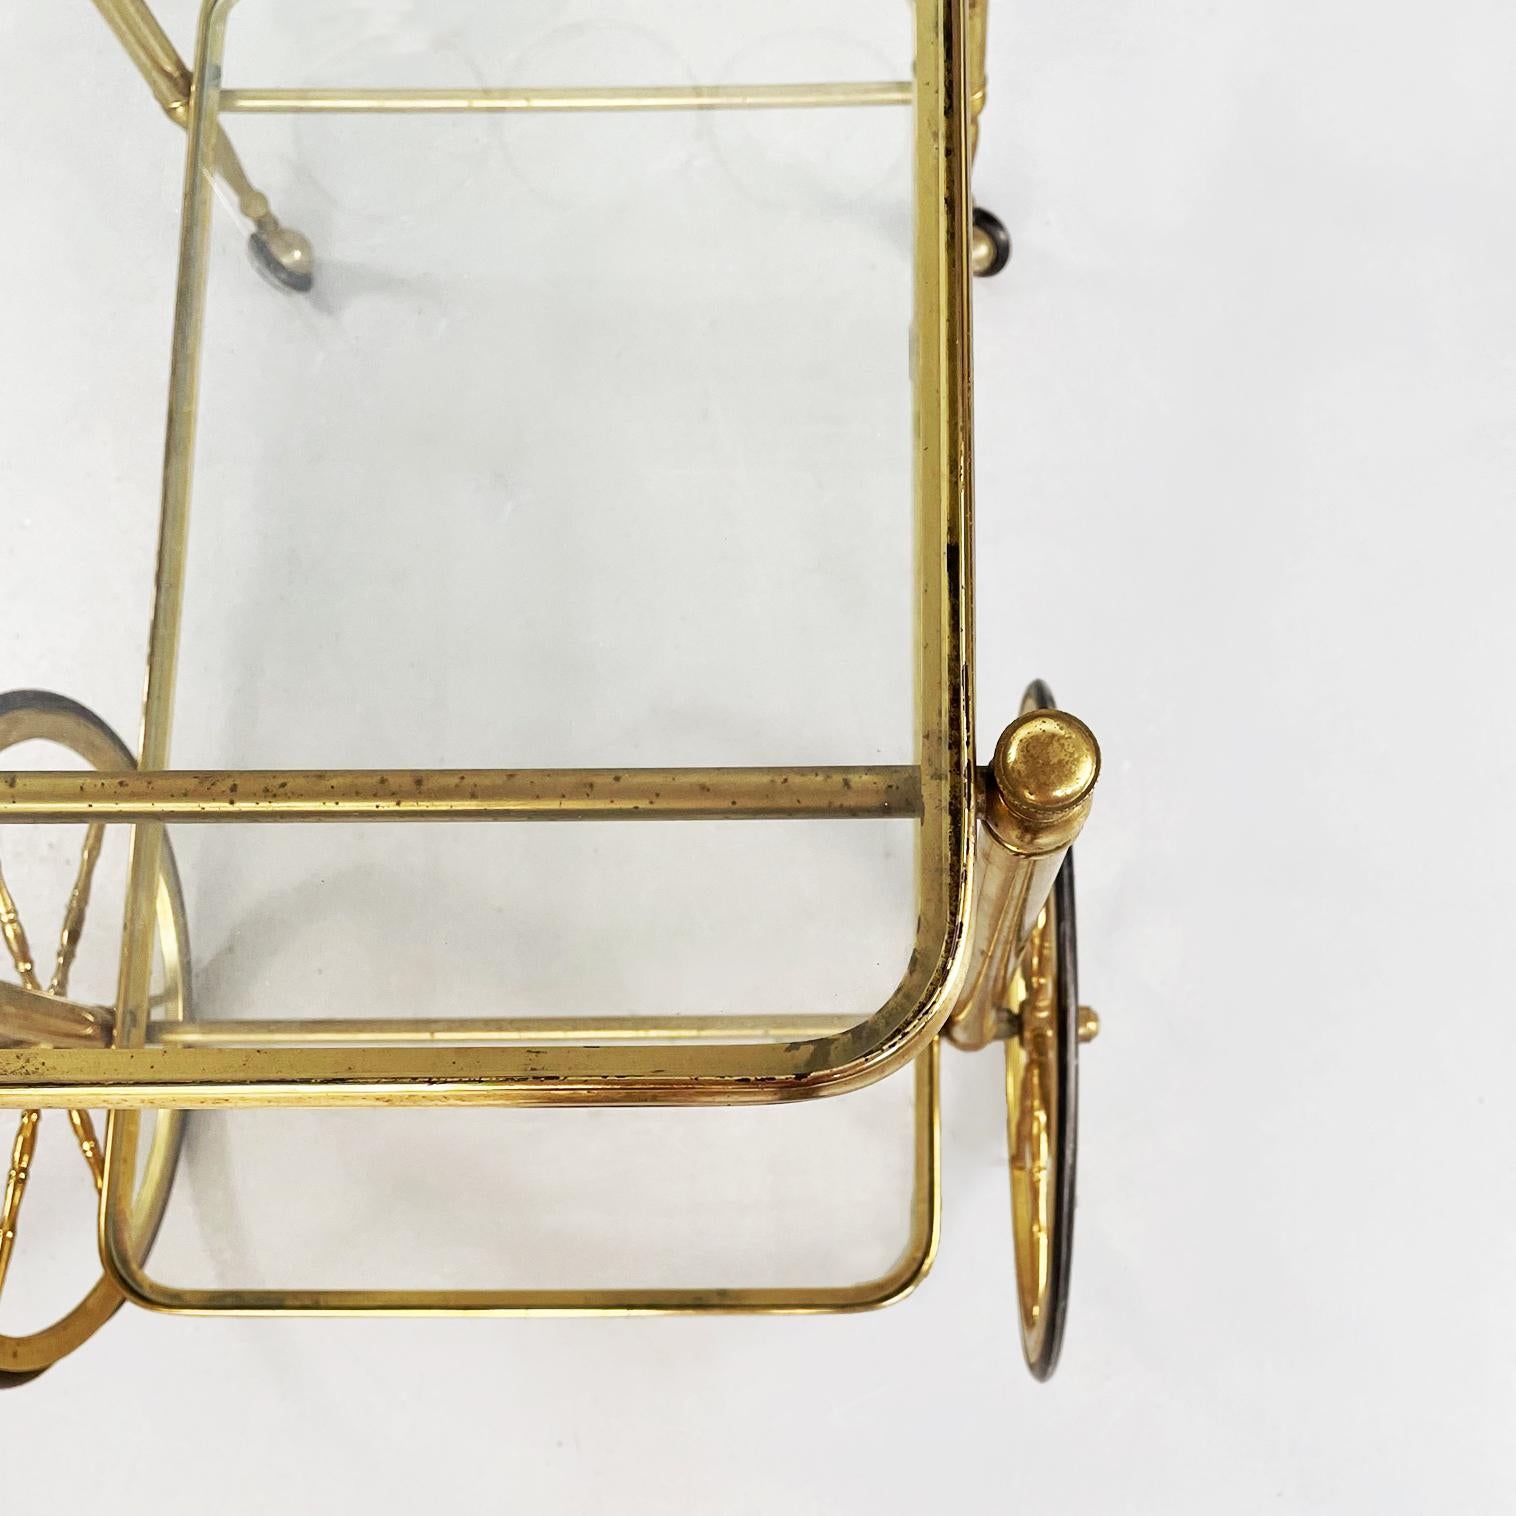 Italian Mid-Century Modern Bar Cart in Brass and Glass, 1950s For Sale 1